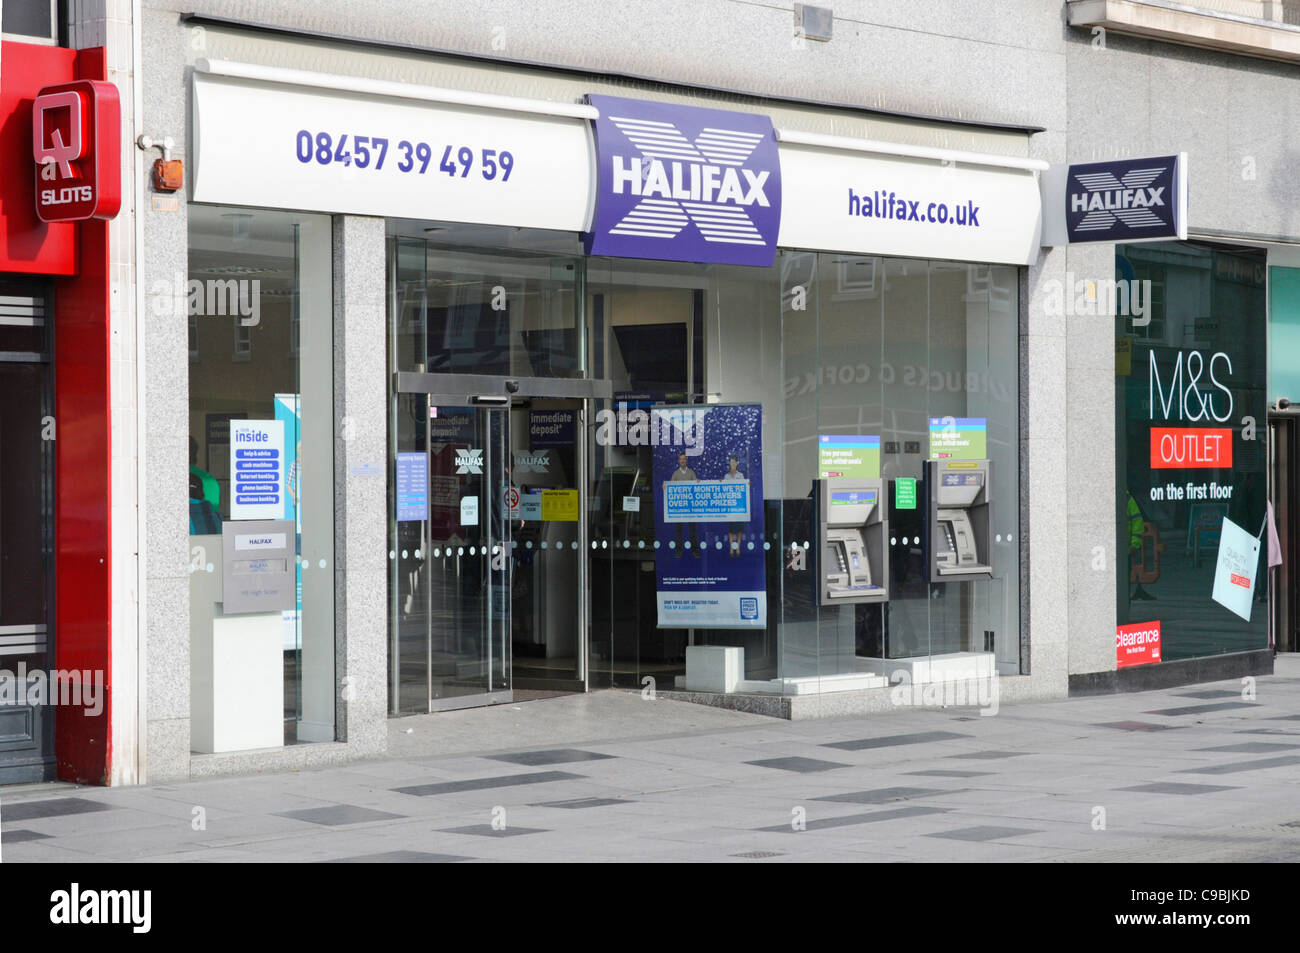 Slough High Street branch premises shop front of Halifax Bank with phone number & internet contact data two ATM cash machines Berkshire England UK Stock Photo